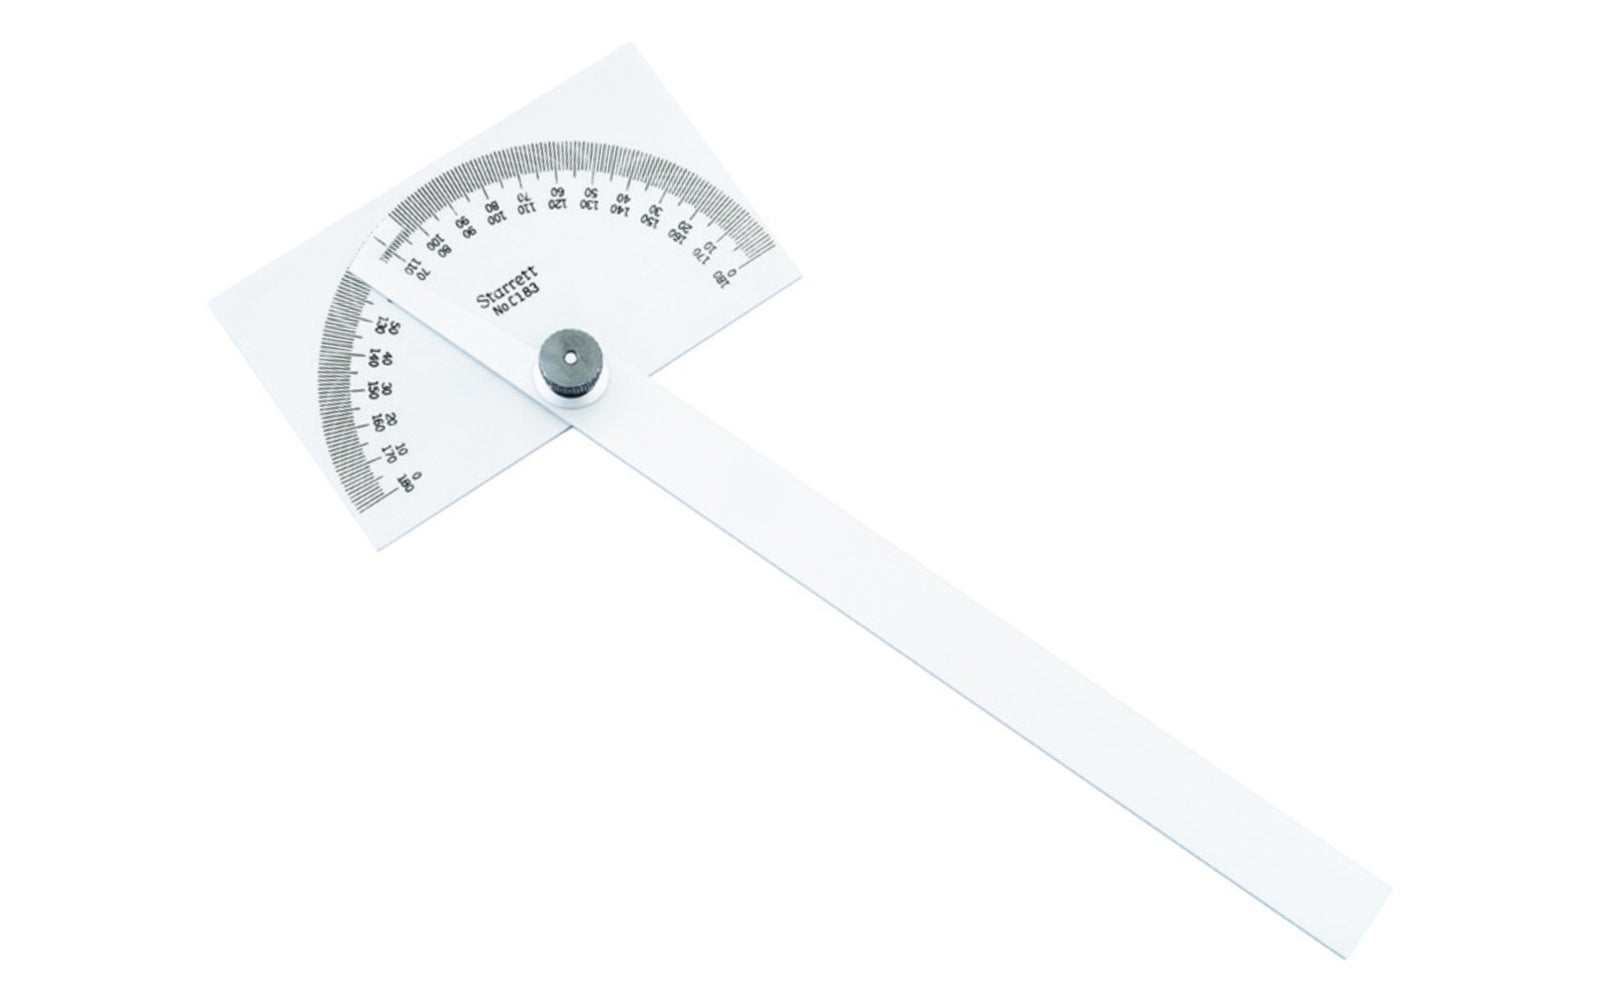 Starrett C183 Satin Chrome Protractor. Useful & accurate tool for setting bevels, transferring angles, squaring tasks, checking cutter clearances, & many other applications. Made in USA. EDP 50672. Satin chrome finish for ease of reading & resistance to rust.